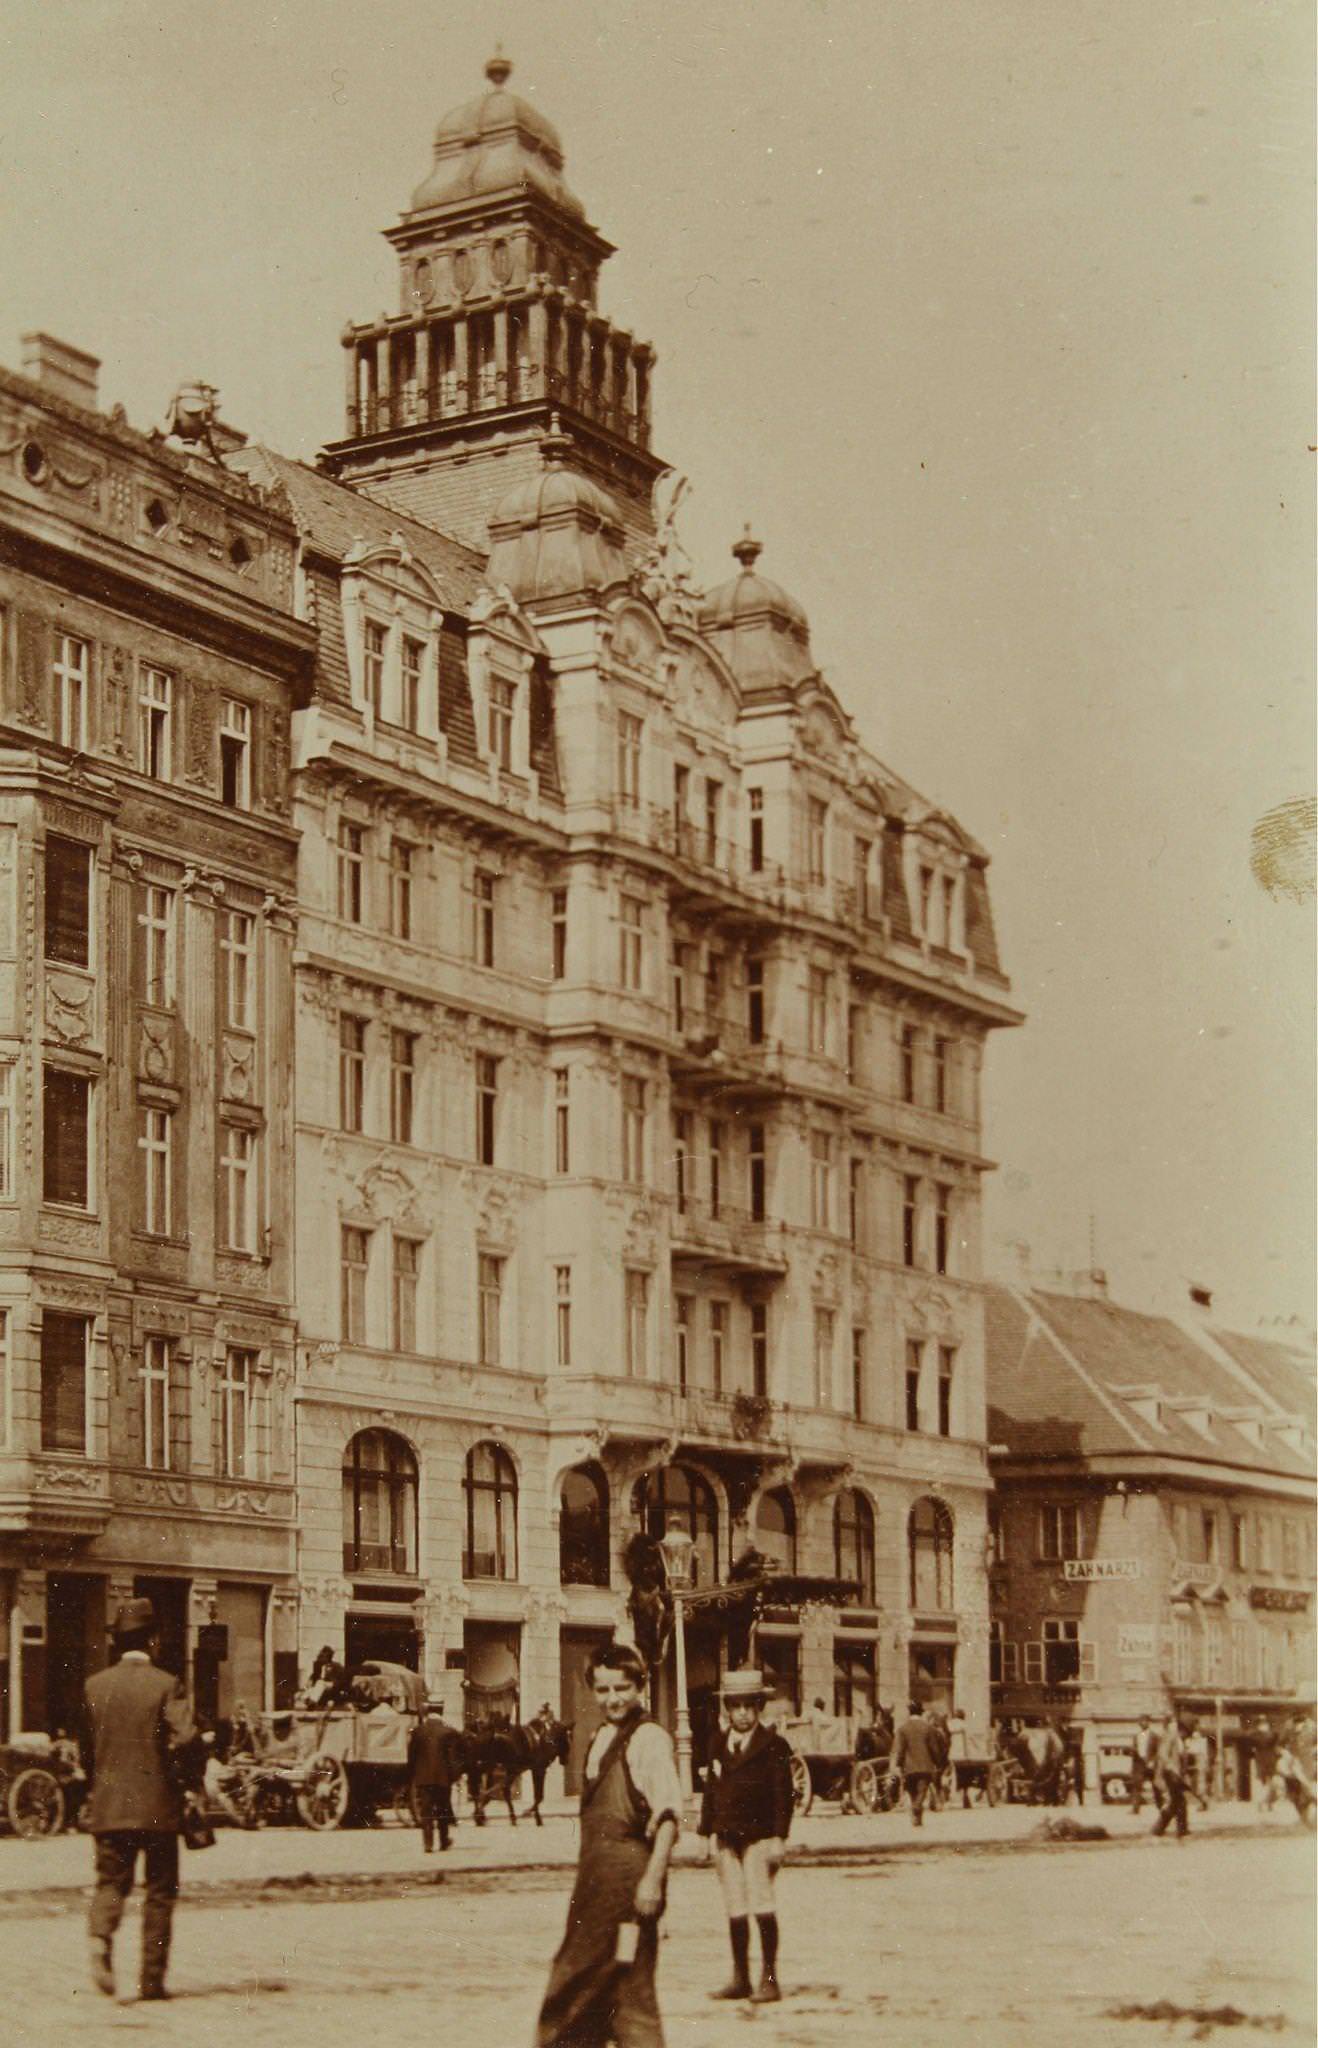 The Renovated Theater An Der Wien In Vienna Of The Left Line, Mariahilf district after modification by Fellner & Helmer in 1902, About 1905